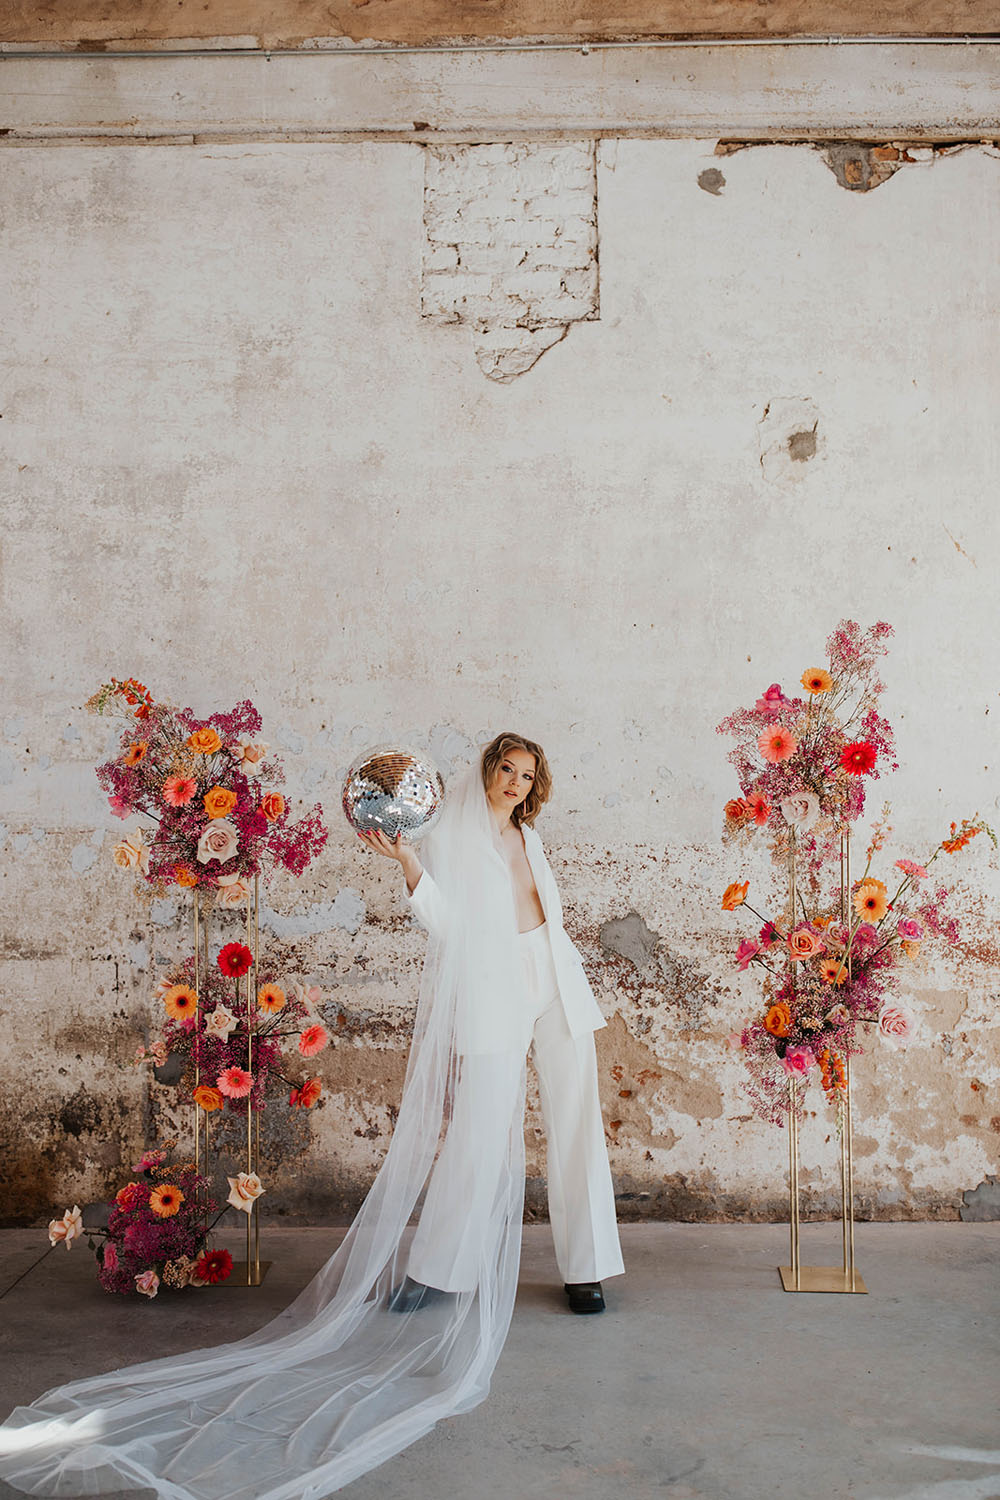 This groovy mod disco-themed wedding is full of flowers & creative backdrop ideas